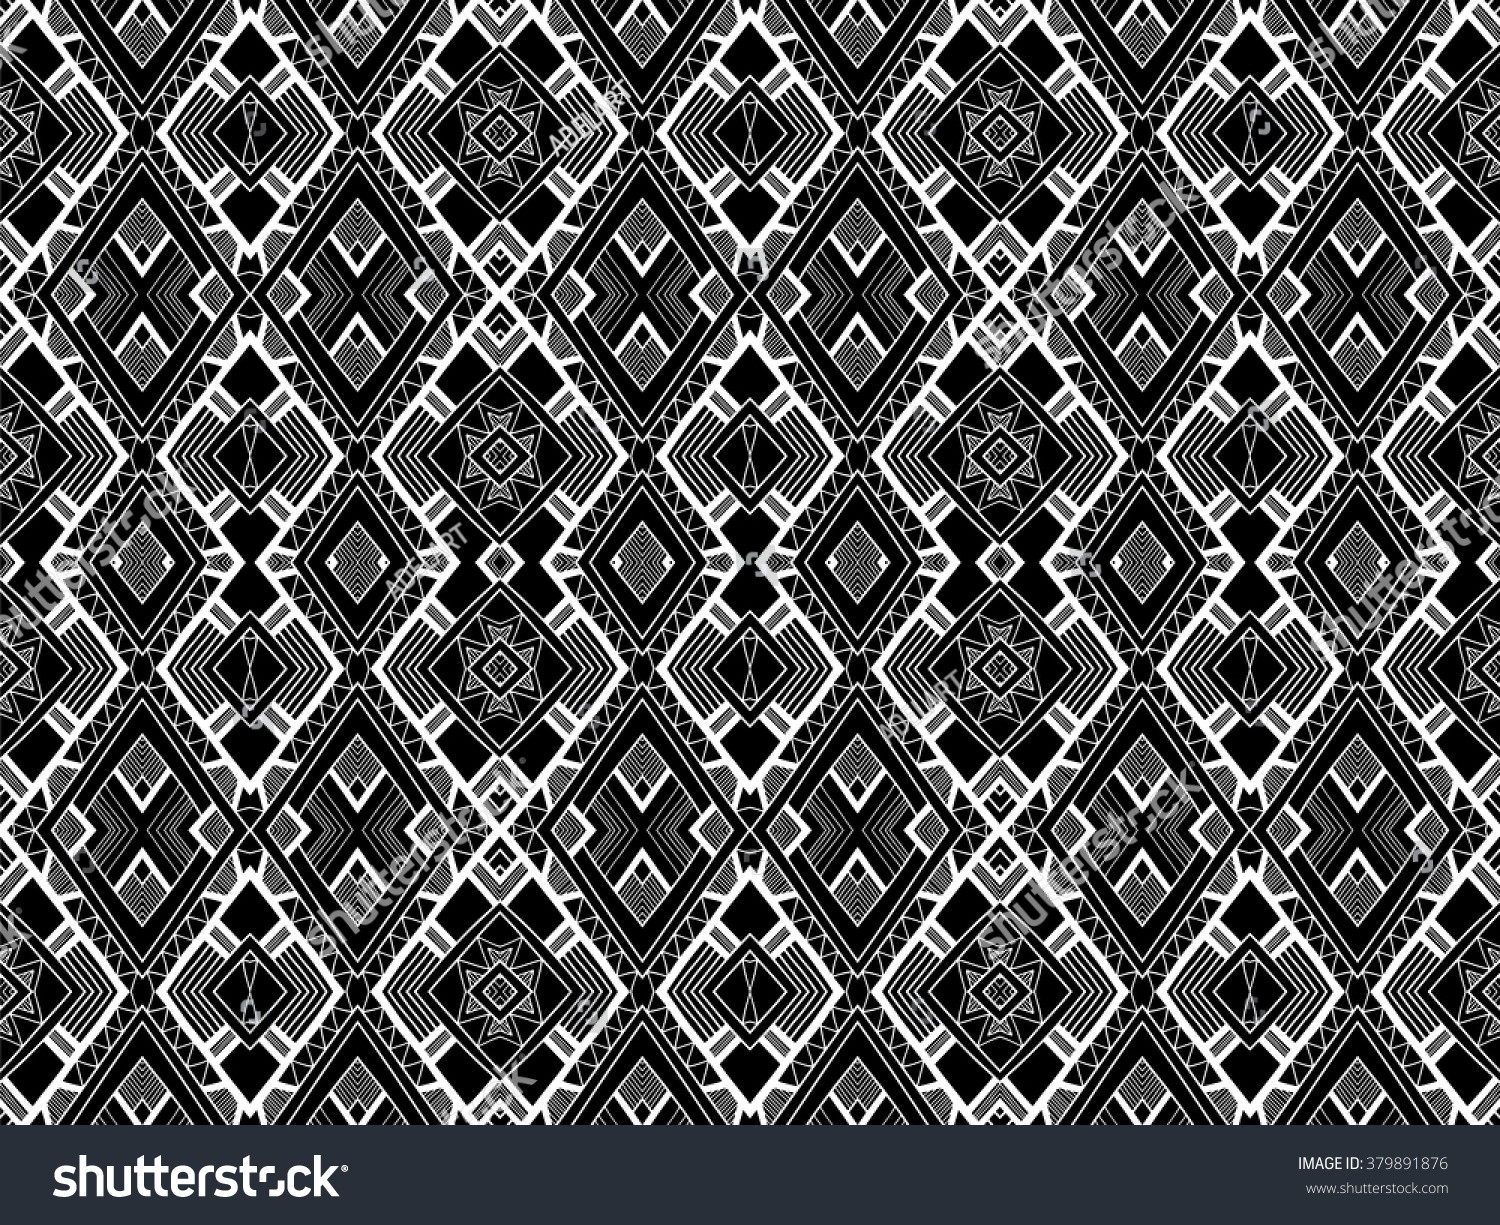 Background Tribal Ornament Simple Ethnic Indian Stock Vector (Royalty ...